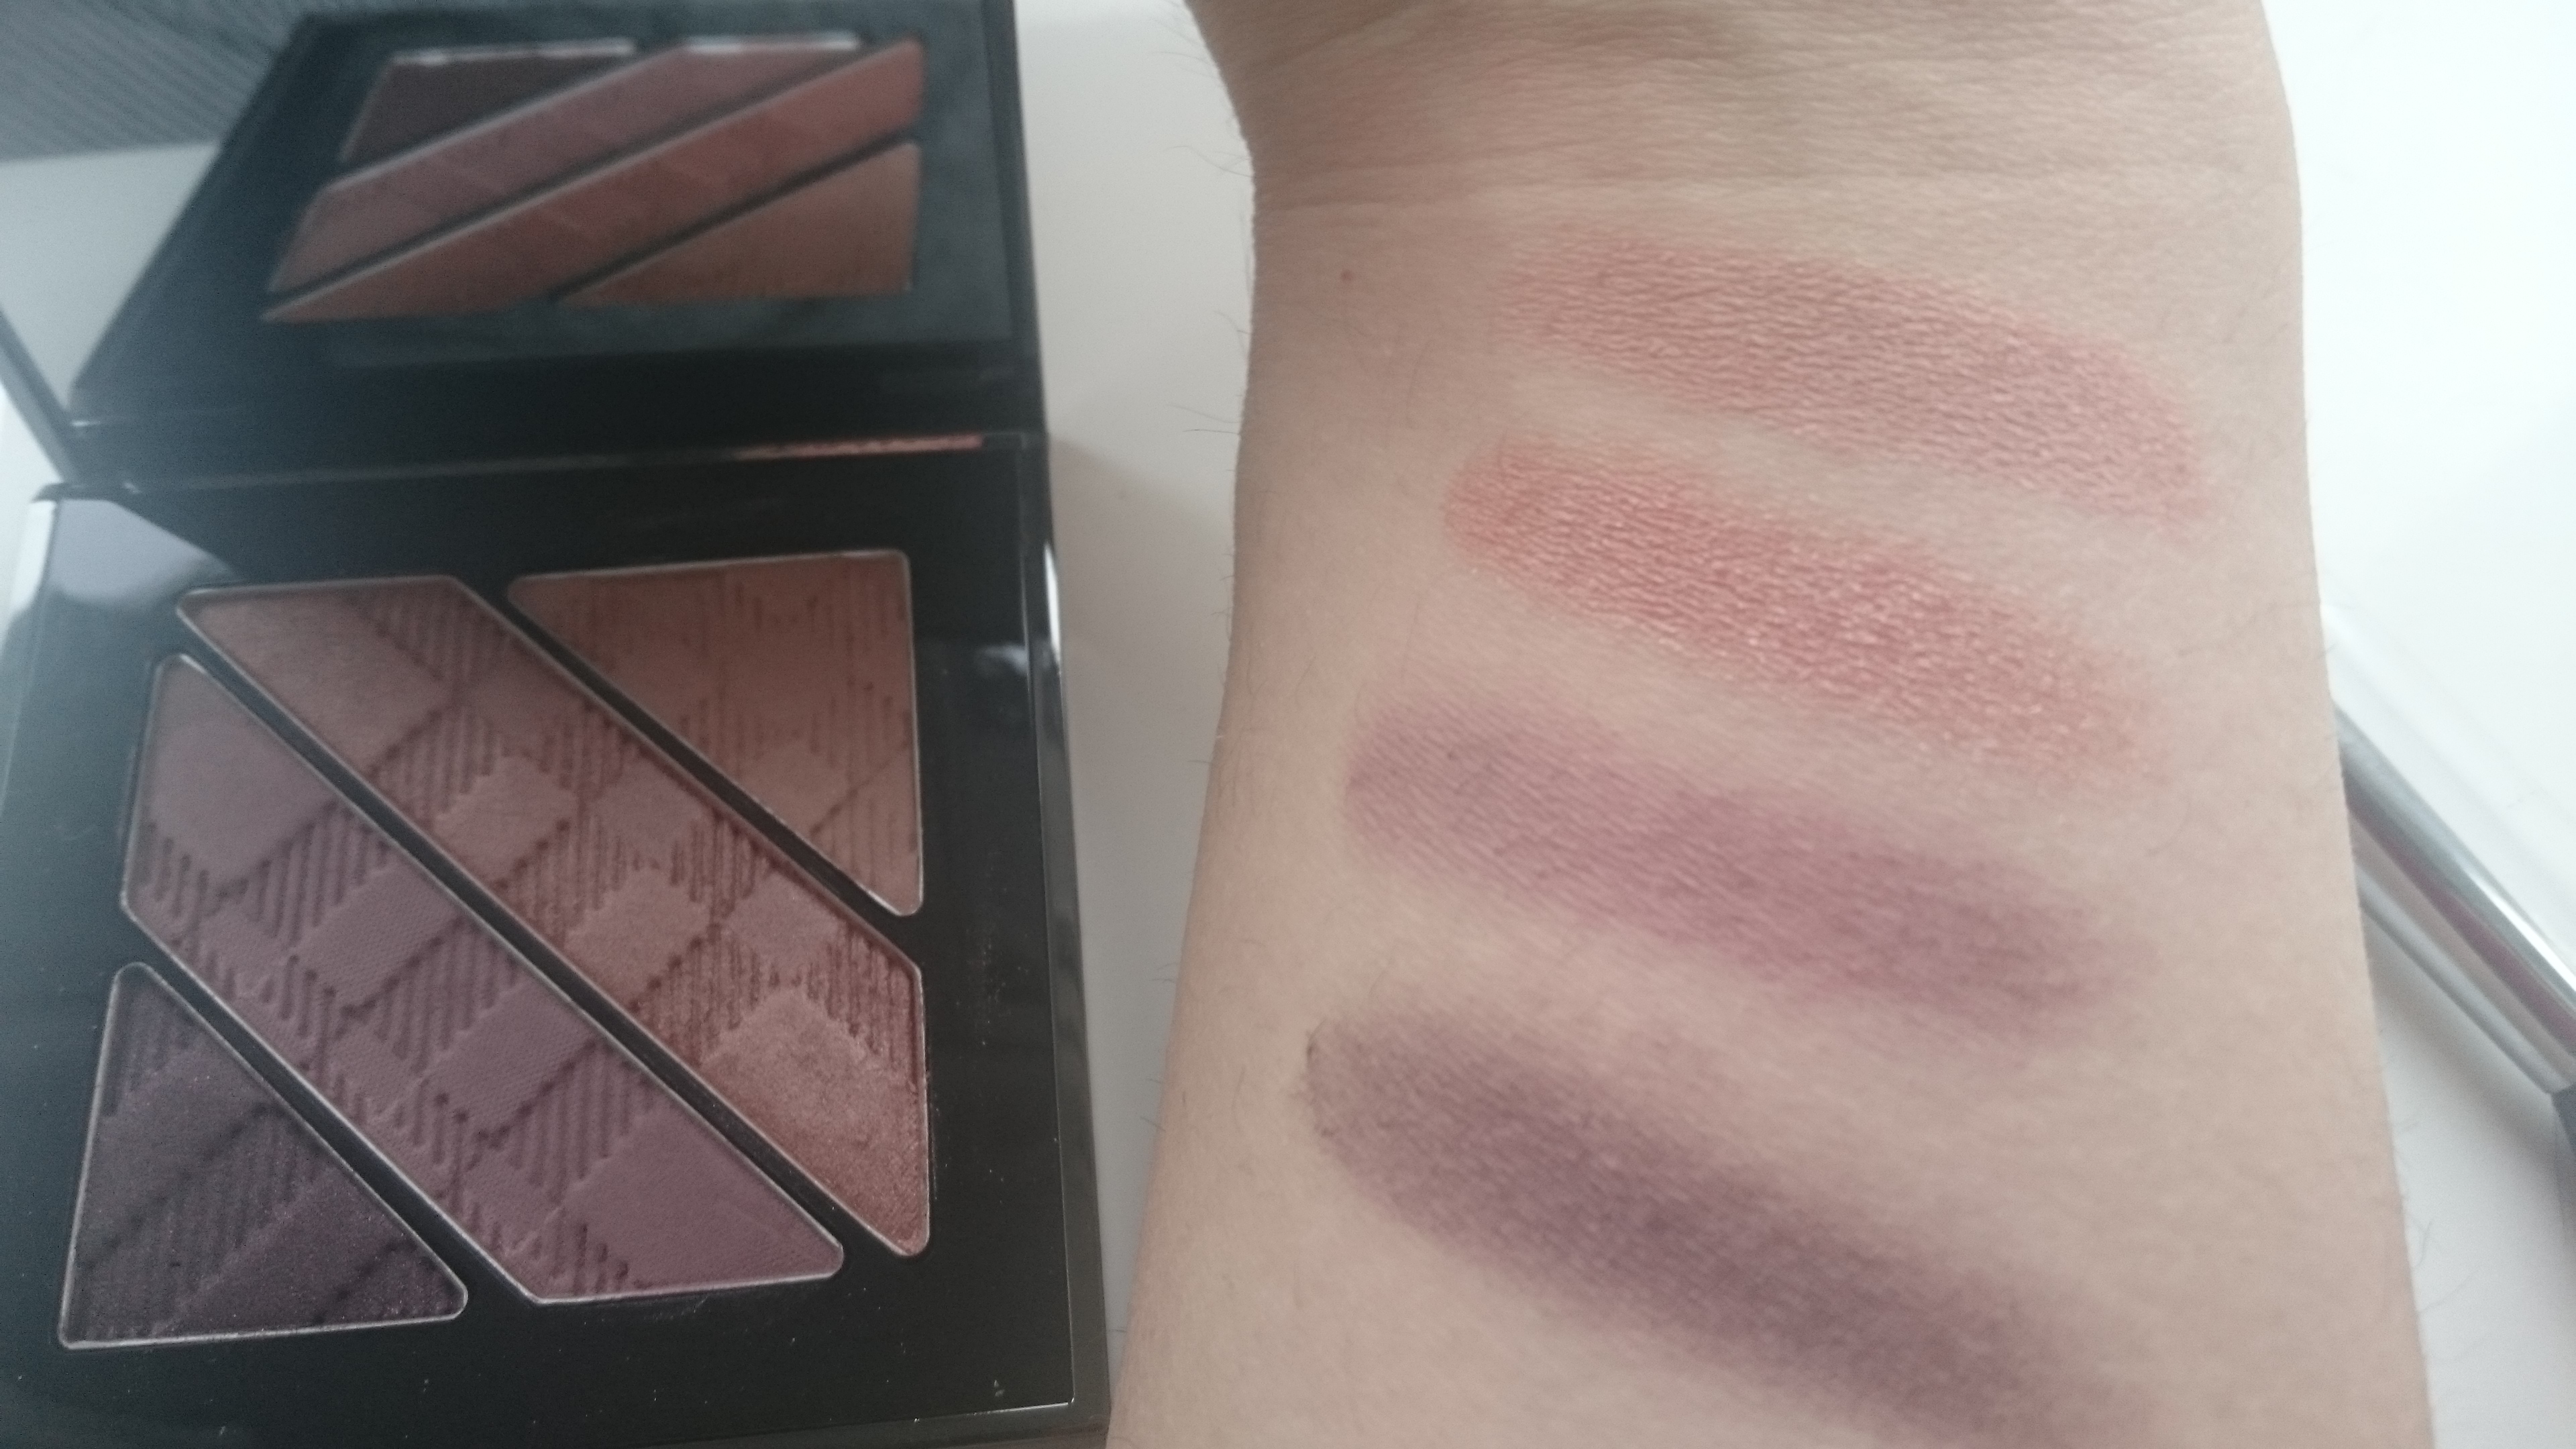 Burberry No. 102 Pale Barley and No. 204 Mulberry: Swatches and Review |  shhdonttellhim